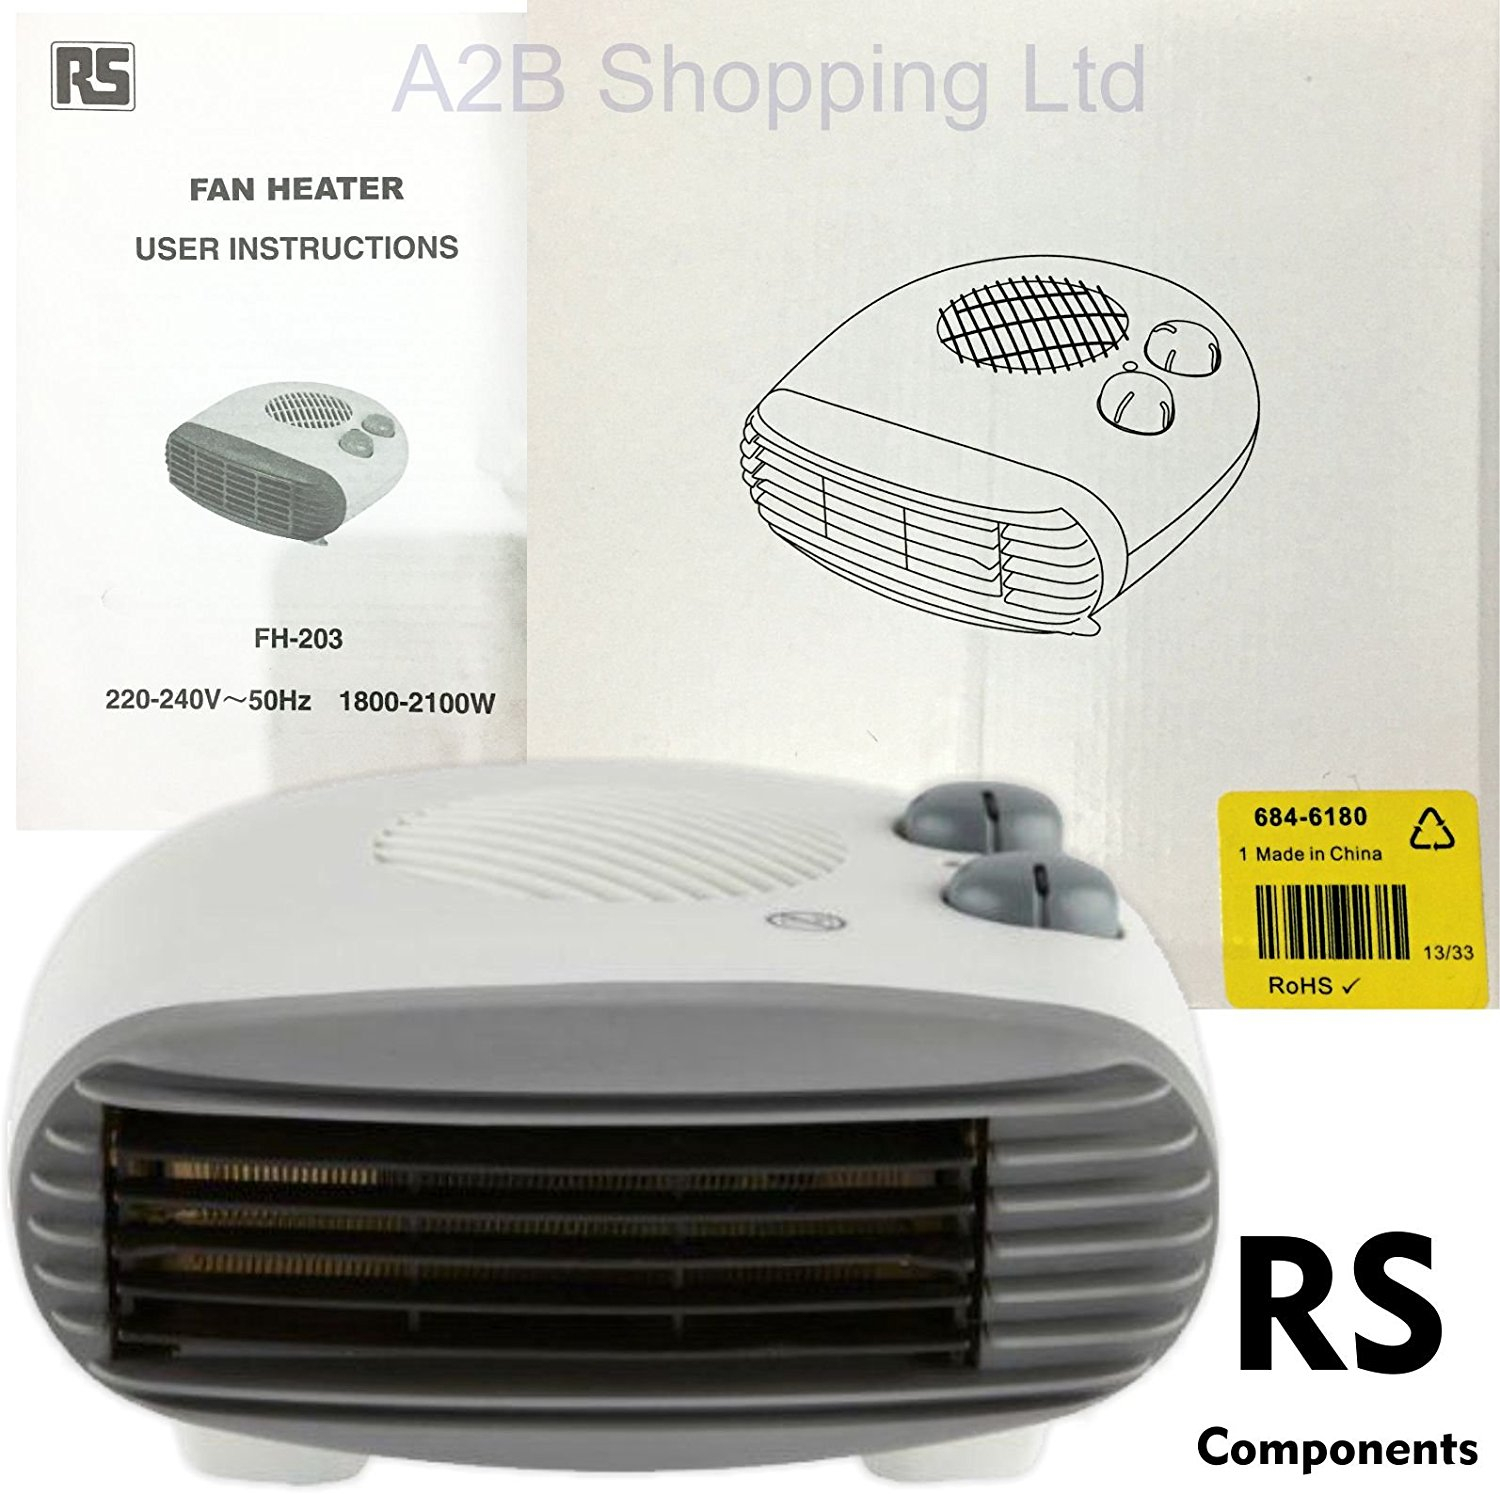 Rs Components 2kw Electric Fan Heater Portable Small Silent Hot Cold Watt 1kw Energy Saving Ce intended for size 1500 X 1494